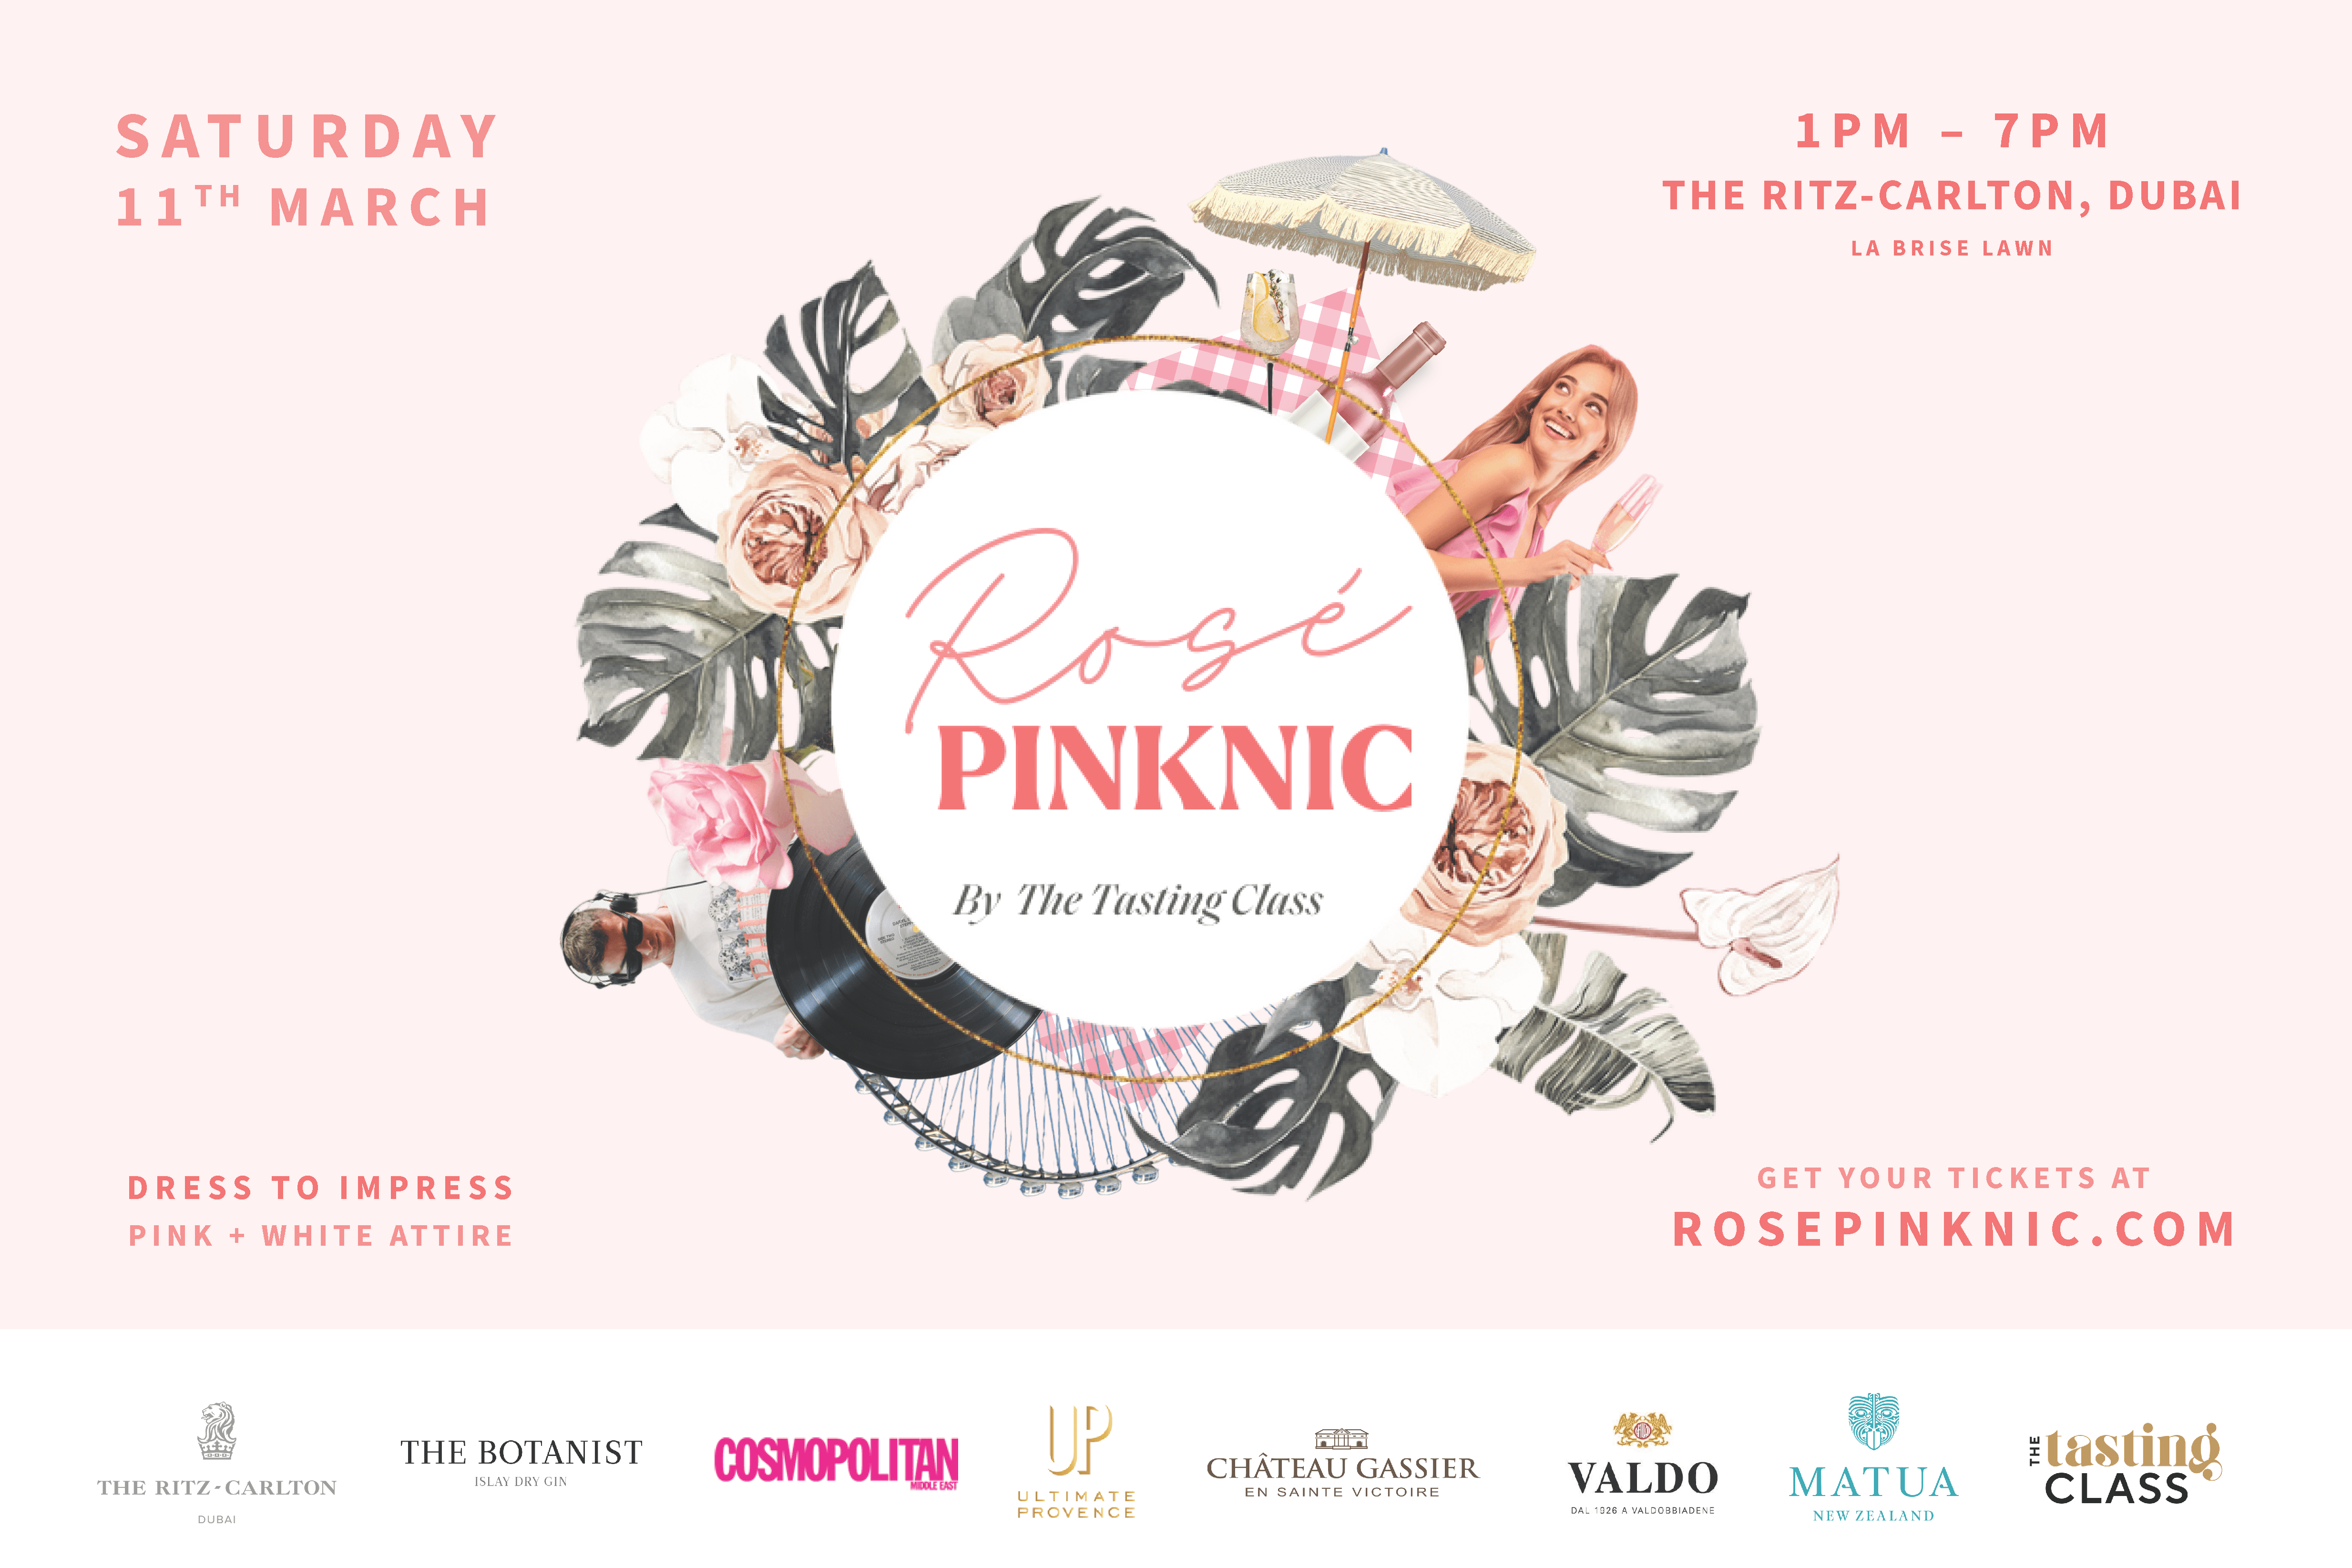 On March 11, The Tasting Class will bring the inaugural Rosé Pinknic to life - a celebration of all things Rosé including fine wines, champagnes, cocktails and the Rosé Lifestyle.